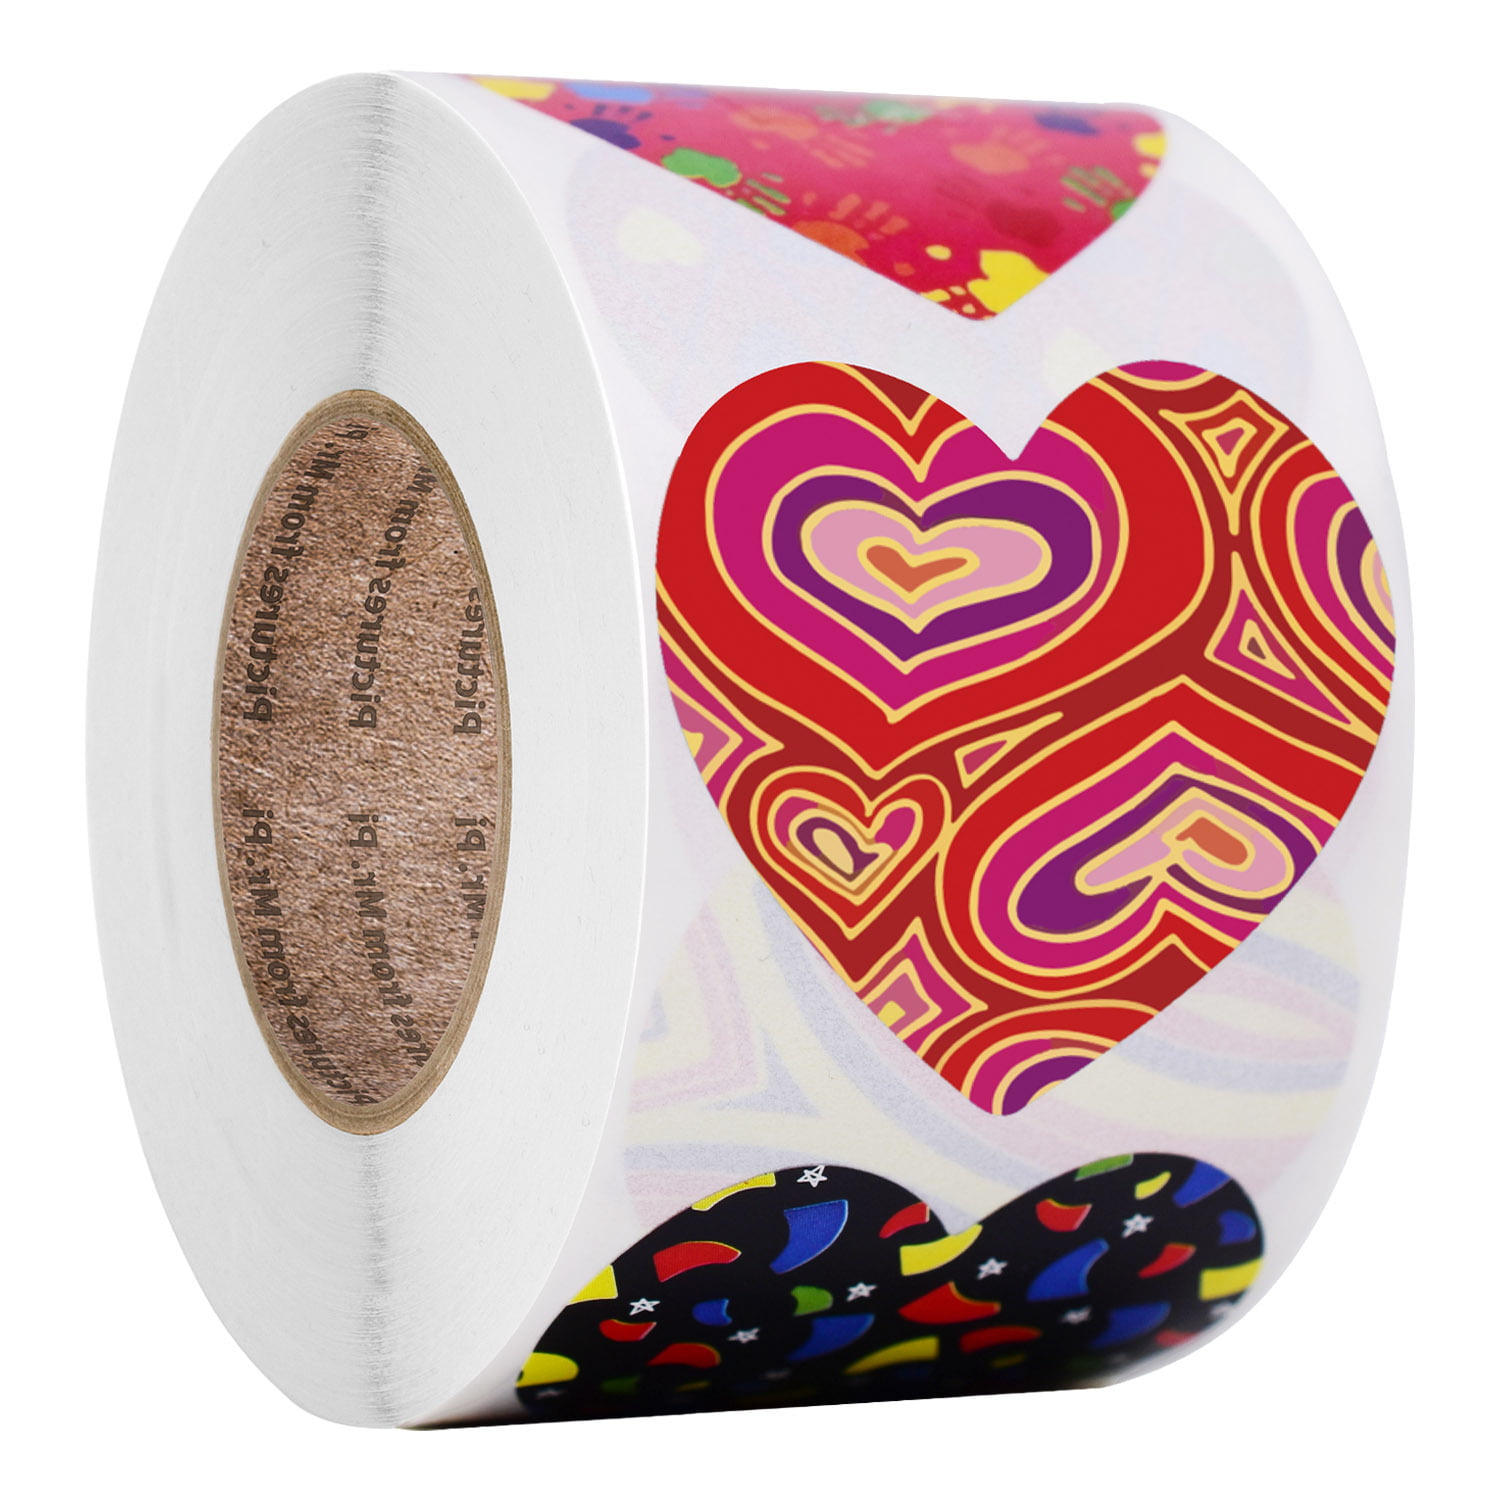 8 Styles 500PCS Colorful Heart Shaped Sticker Roll 1inch Self-Adhesive Love Decorative Stickers Heart Labels for Valentine Art Craft Party Favor Supplies Valentine/'s Day Stickers